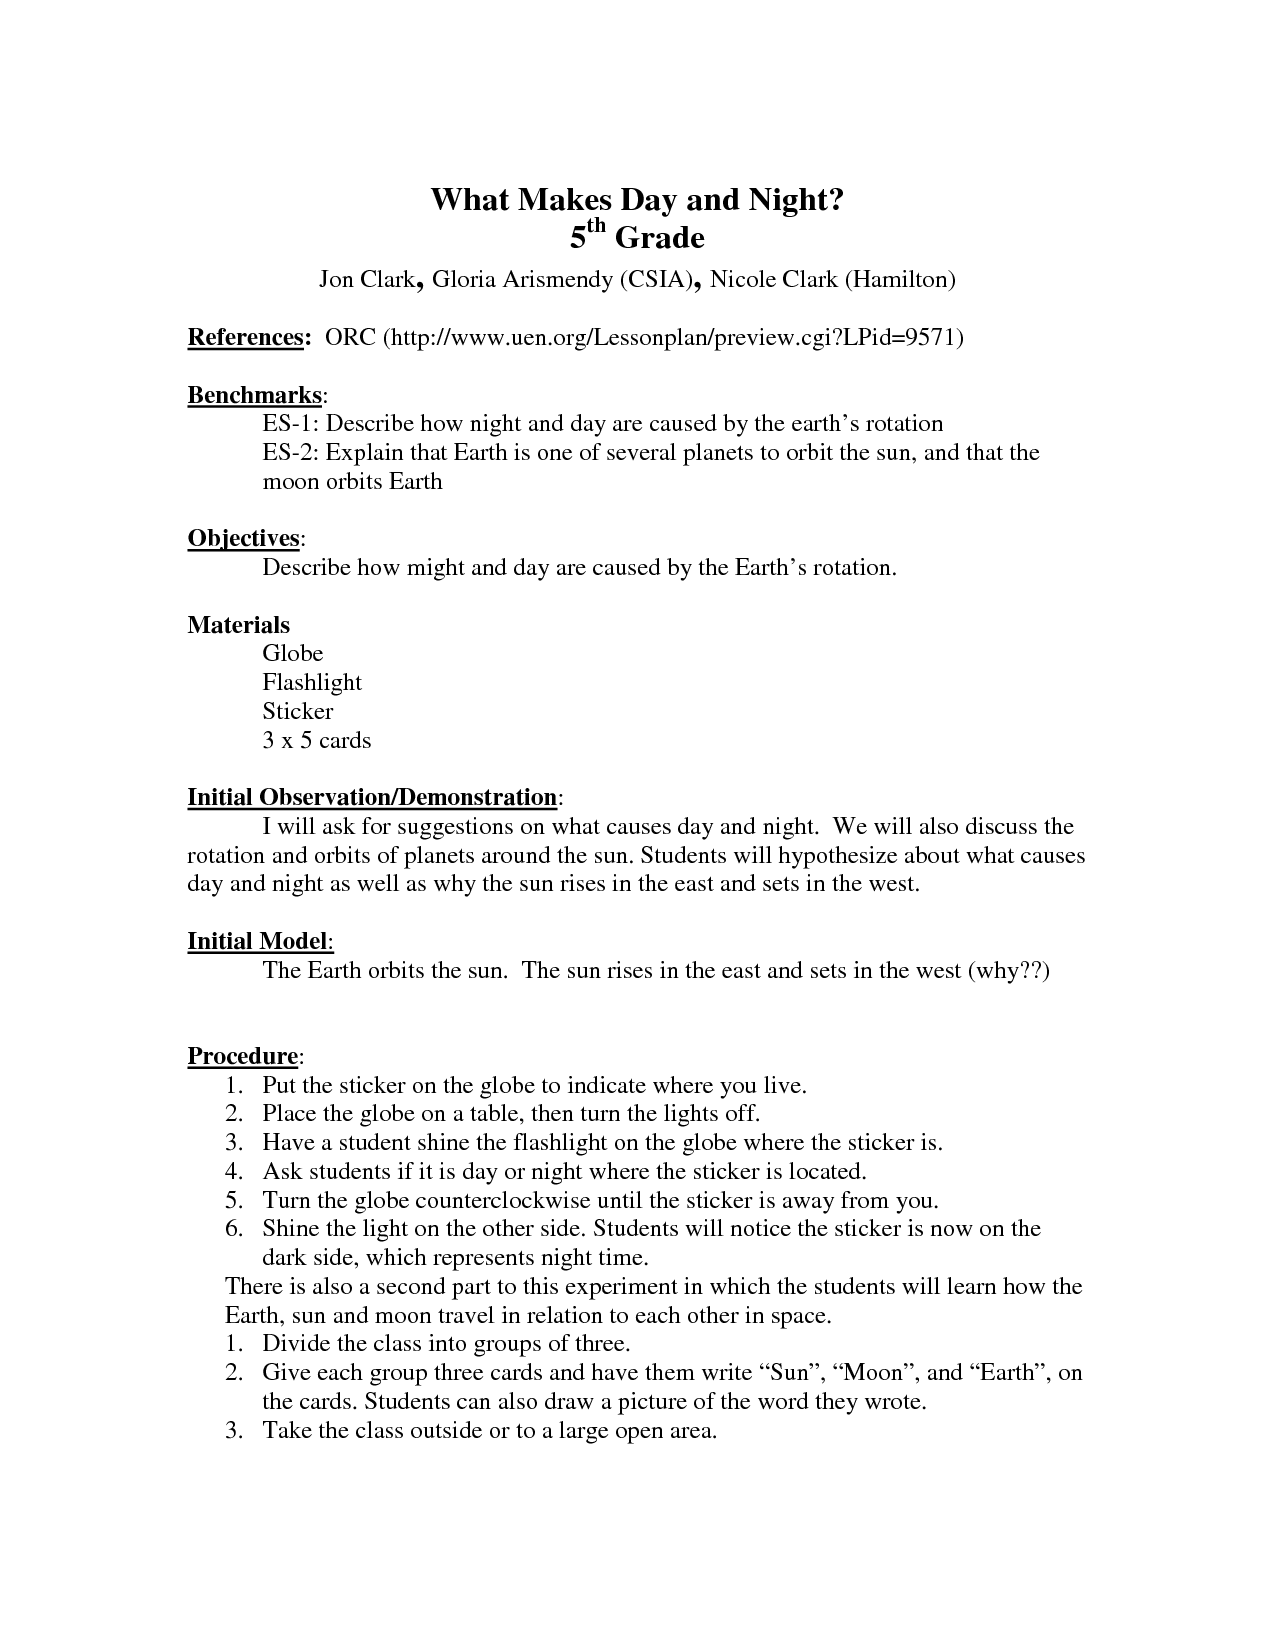 Earth Rotation Day and Night Worksheet Image